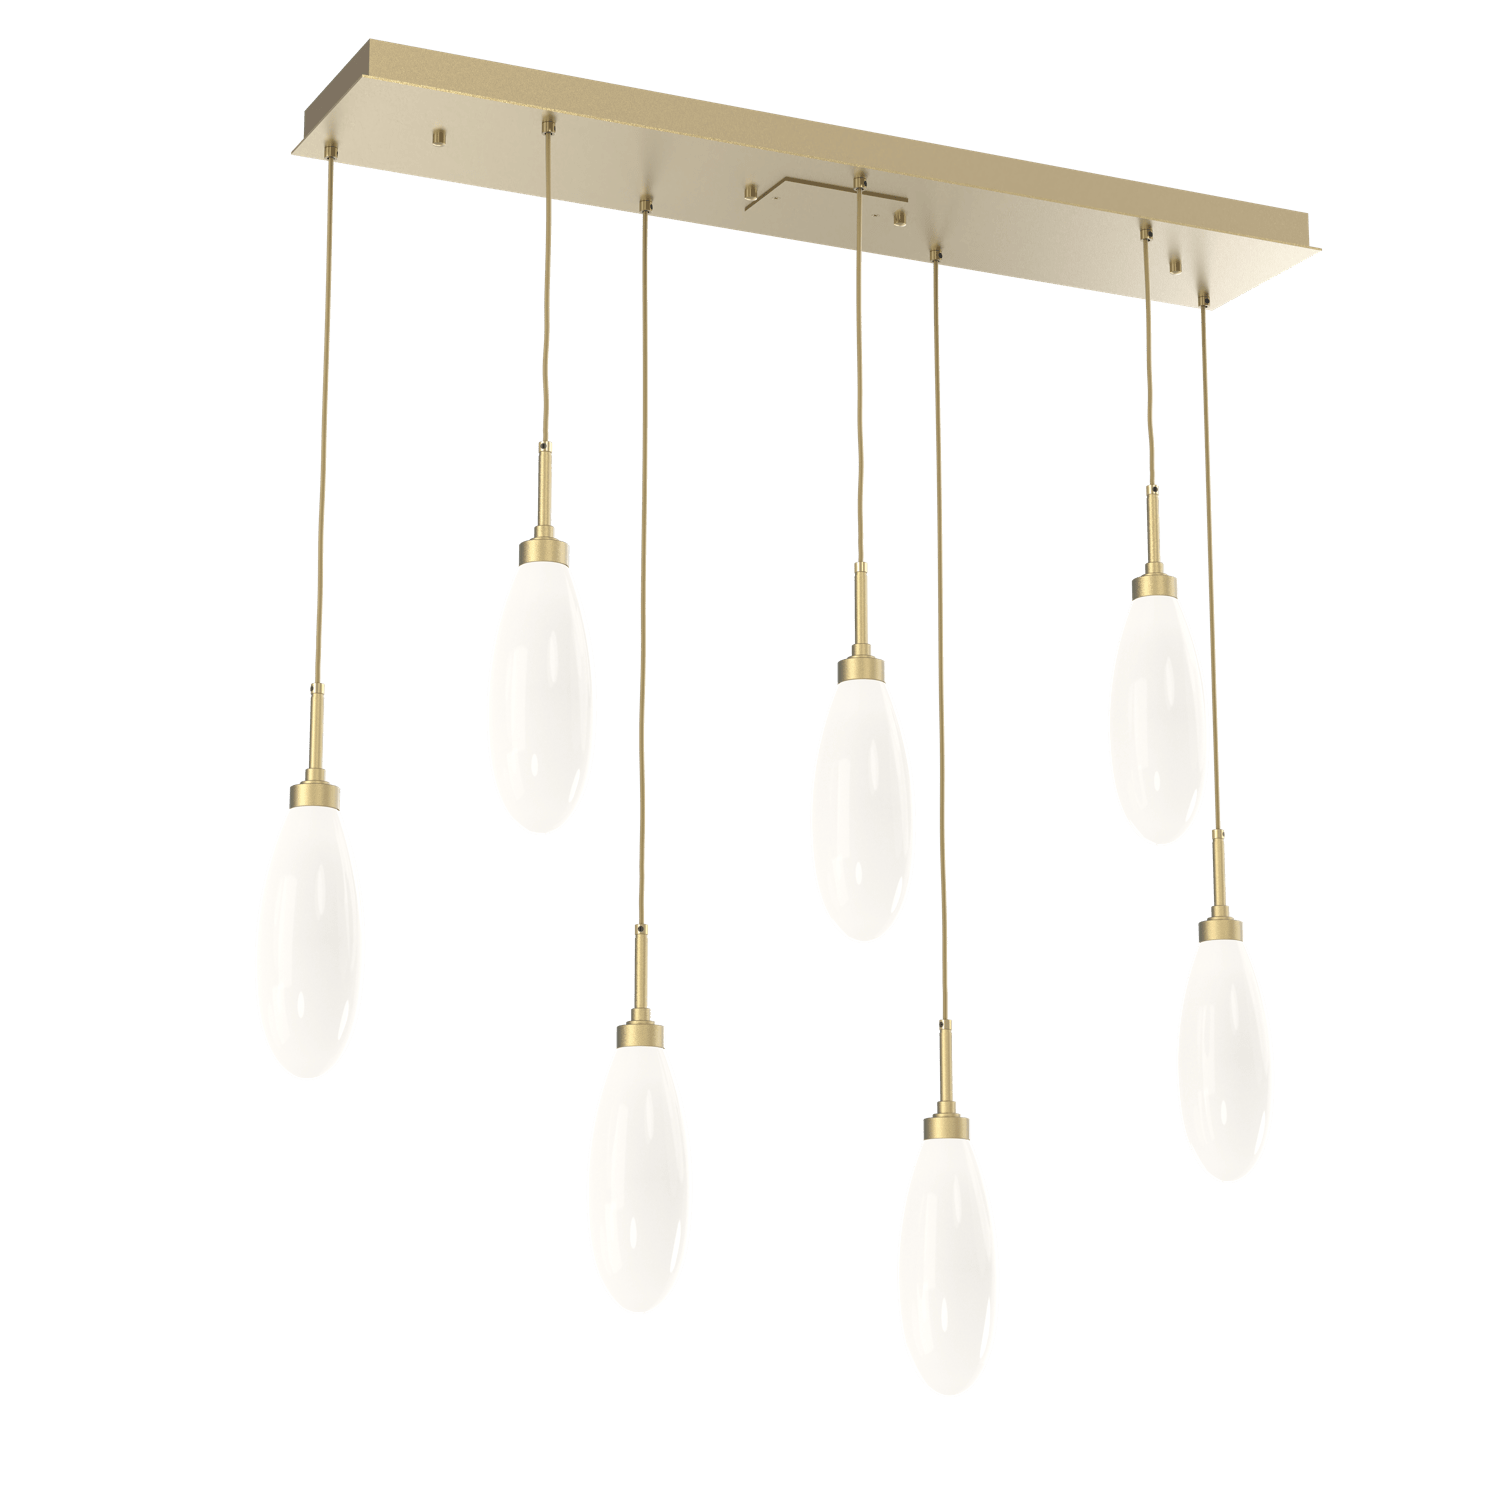 PLB0071-07-GB-WL-LL-Hammerton-Studio-Fiori-7-light-linear-pendant-chandelier-with-gilded-brass-finish-and-opal-white-glass-shades-and-LED-lamping